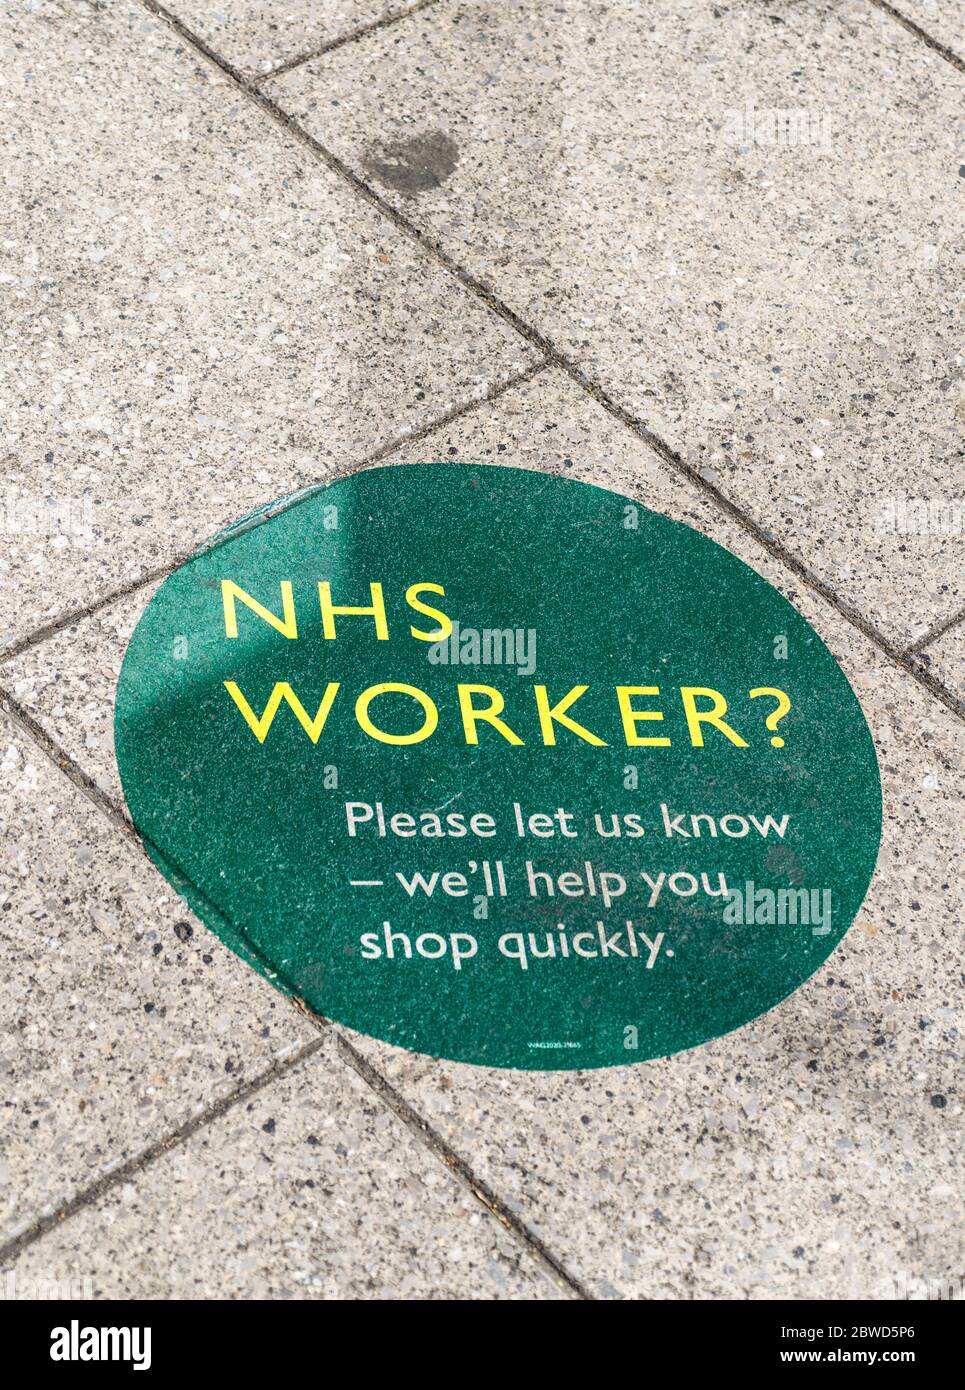 NHS key worker shopping skip the queue Stock Photo